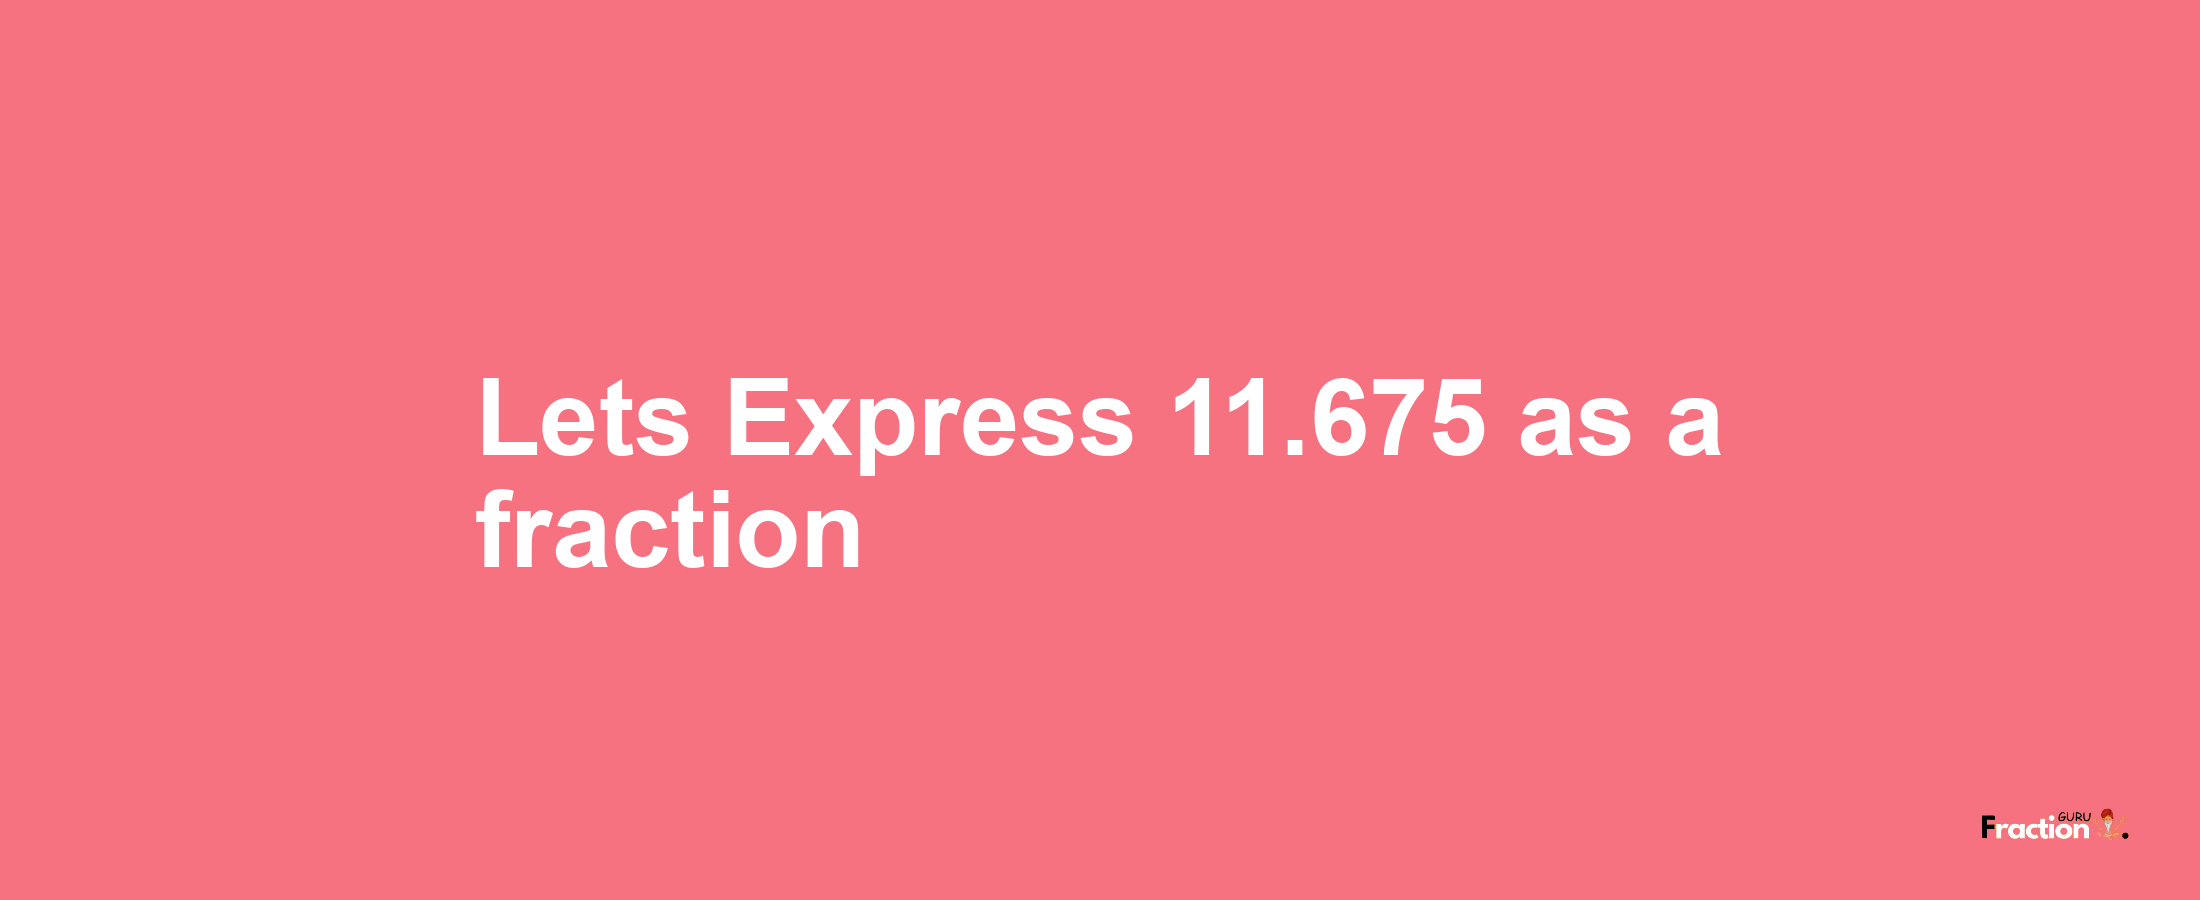 Lets Express 11.675 as afraction